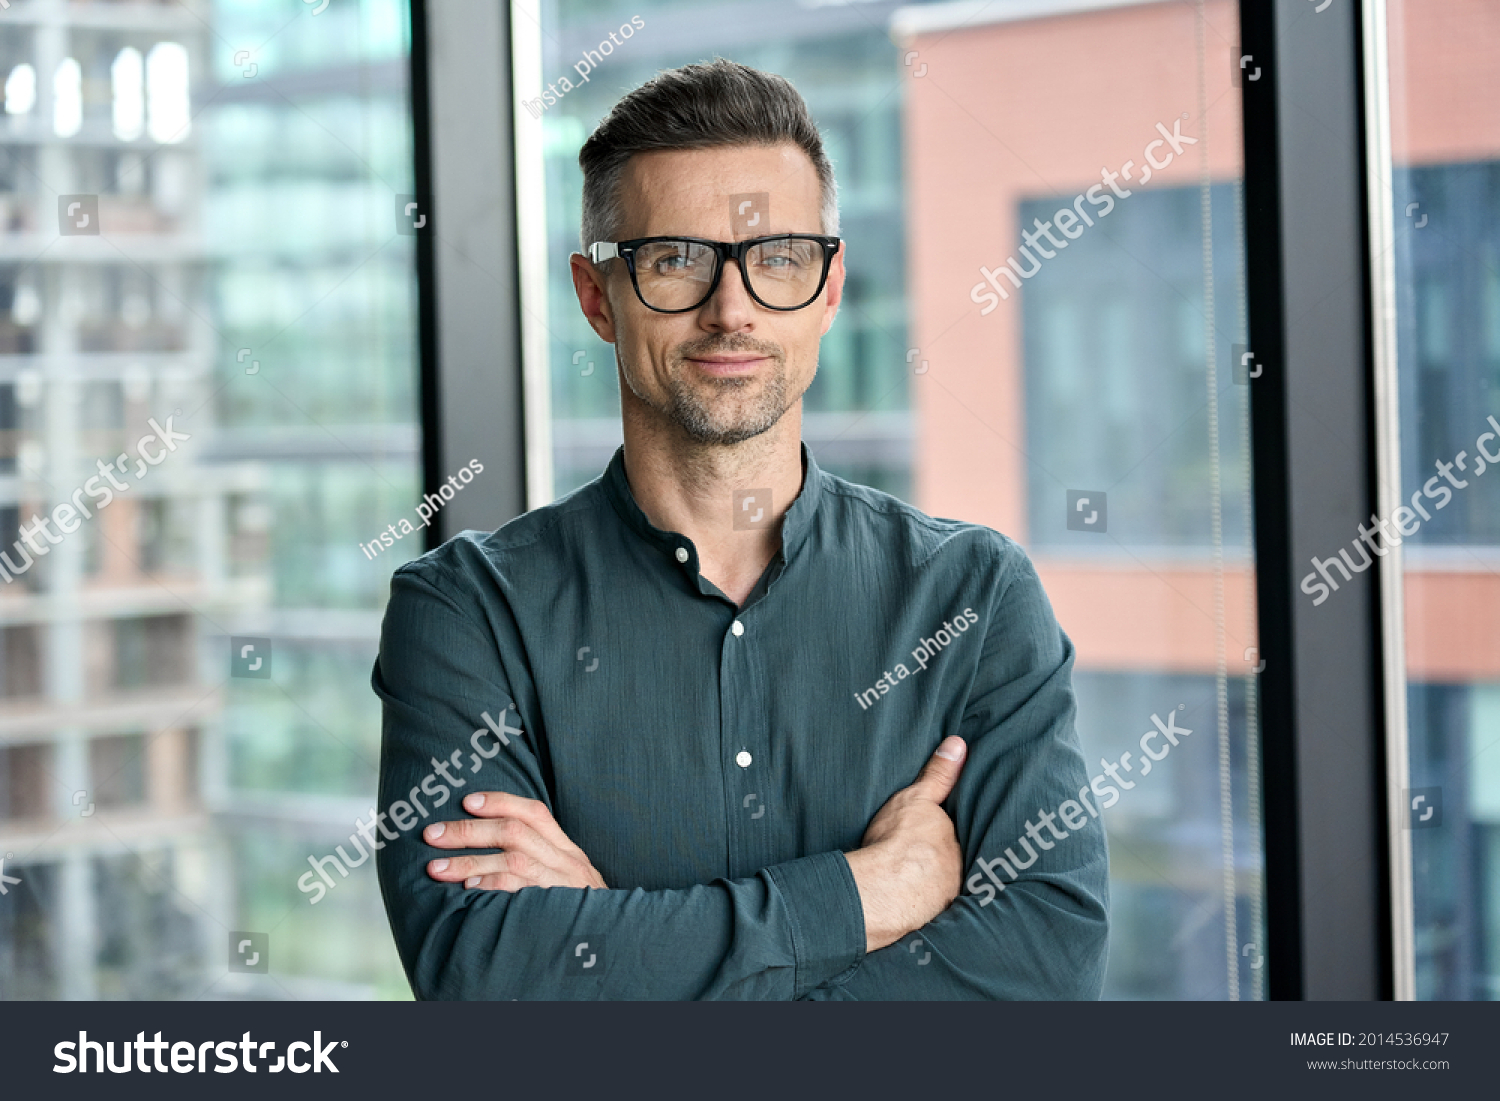 Smiling confident mature businessman looking at camera standing in office. Elegant stylish corporate leader successful ceo executive manager wearing glasses posing for headshot business portrait. #2014536947